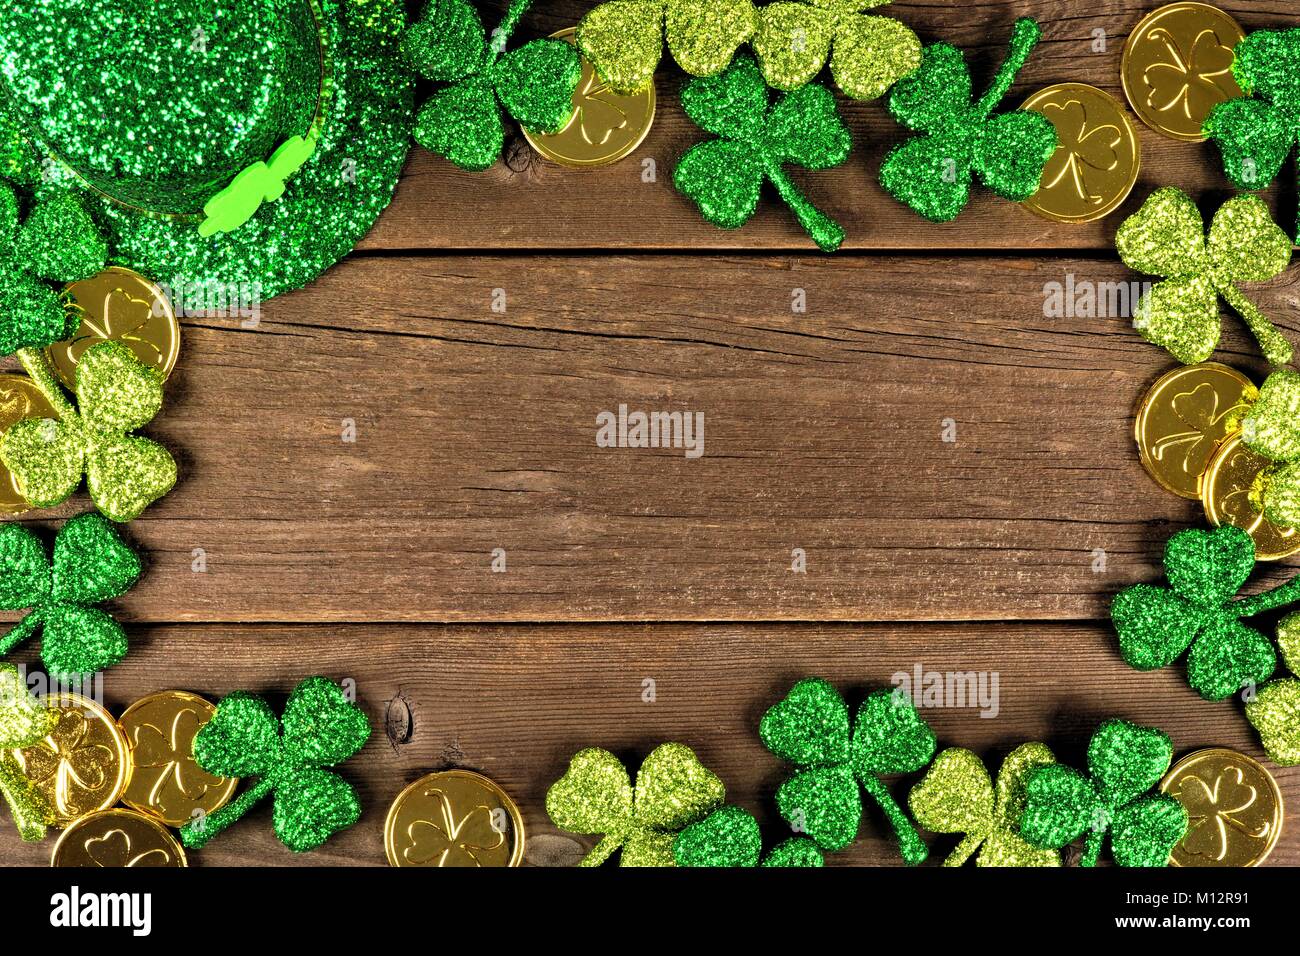 St Patricks Day frame of shamrocks, gold coins and leprechaun hat over rustic wood Stock Photo